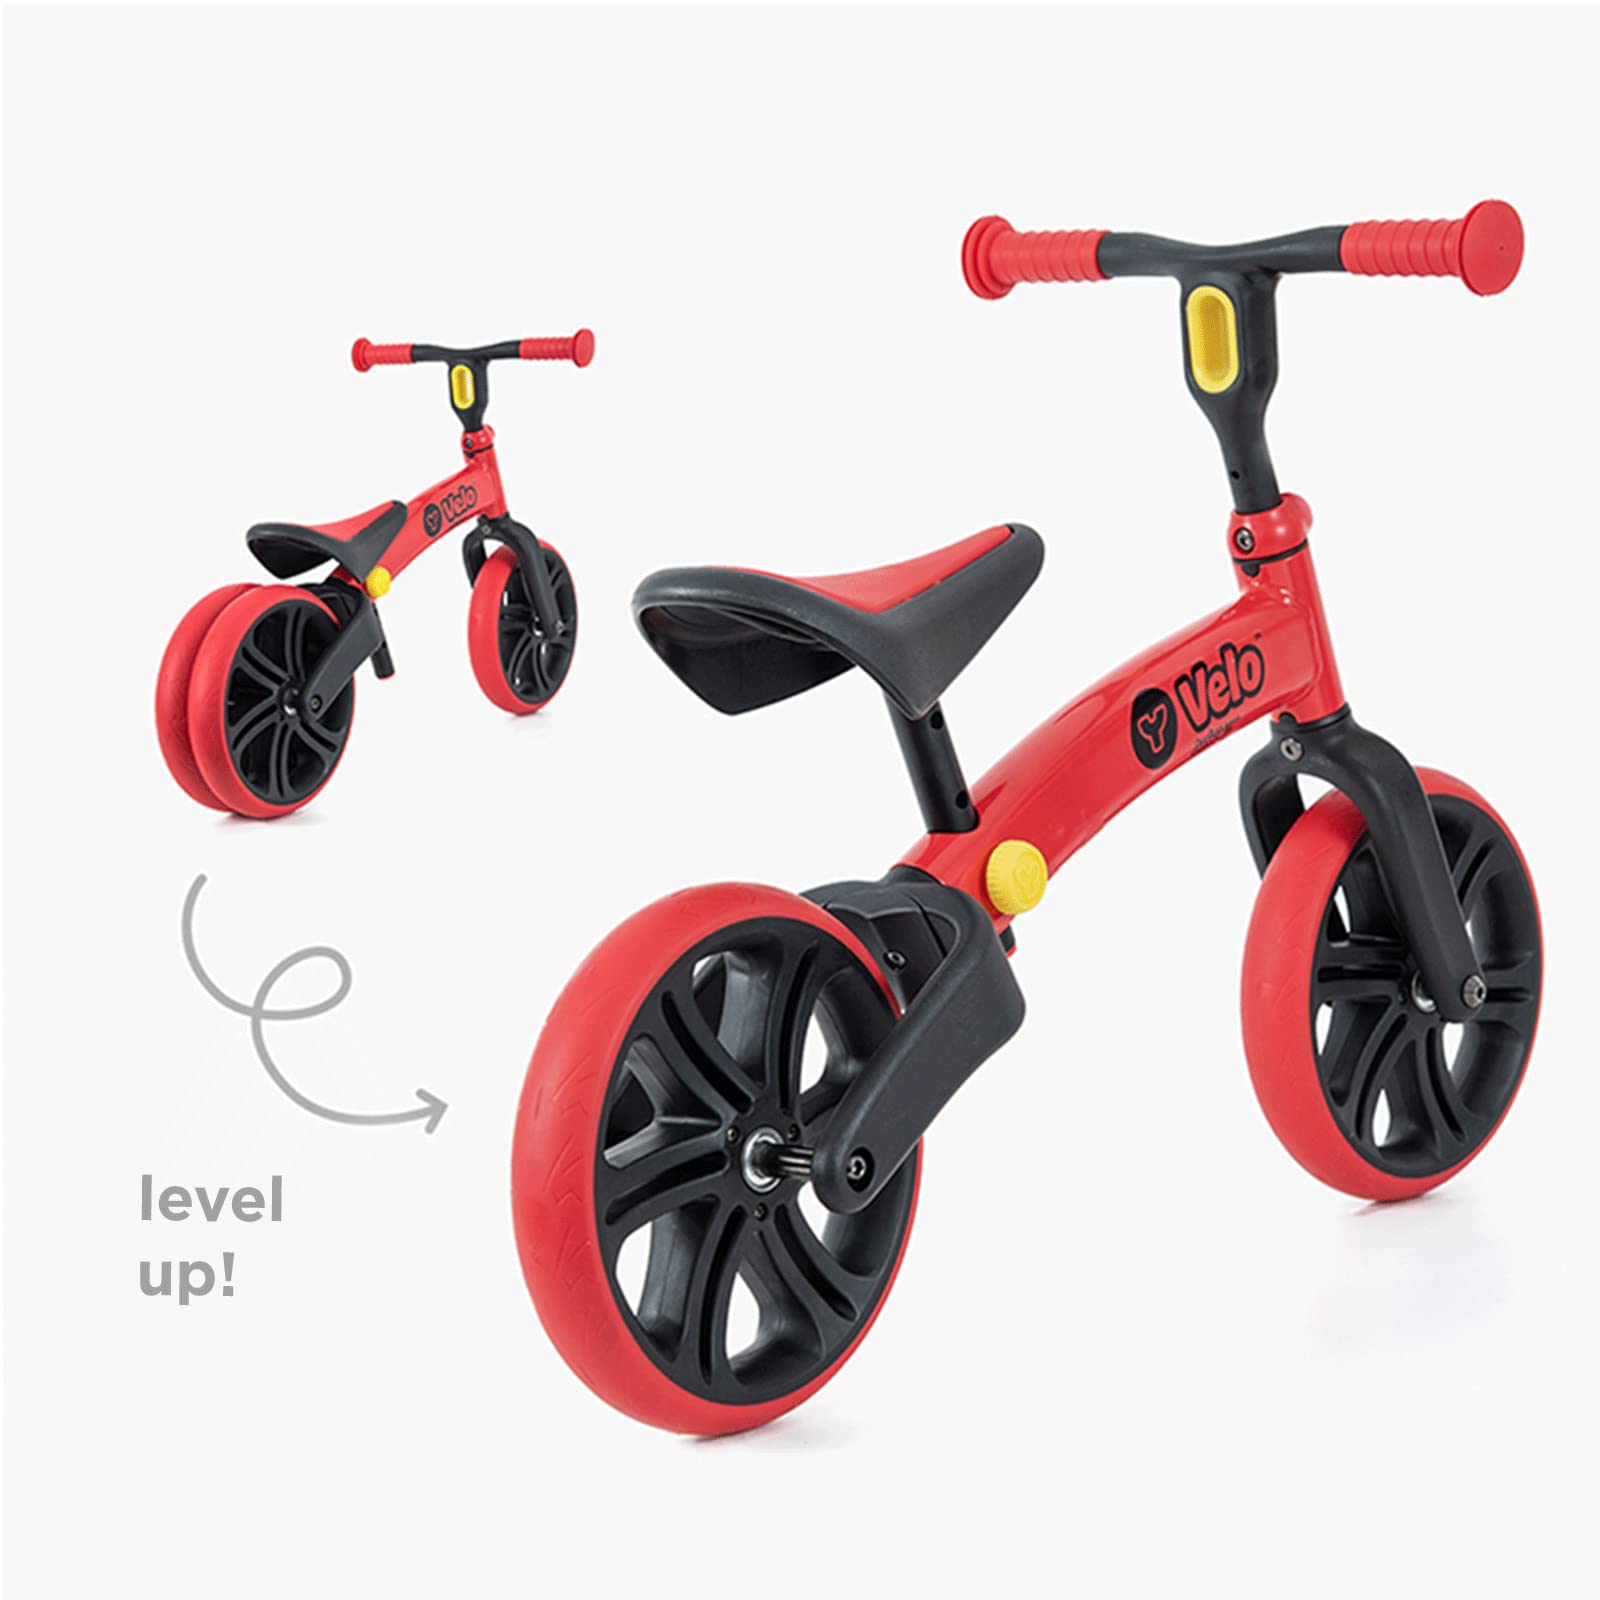 Yvolution Y Velo Junior Toddler Balance Bike 9 Inch Wheel No-Pedal Training Bicycle for Kids Boys Girls Age 18 Months to 2,3,4 Years